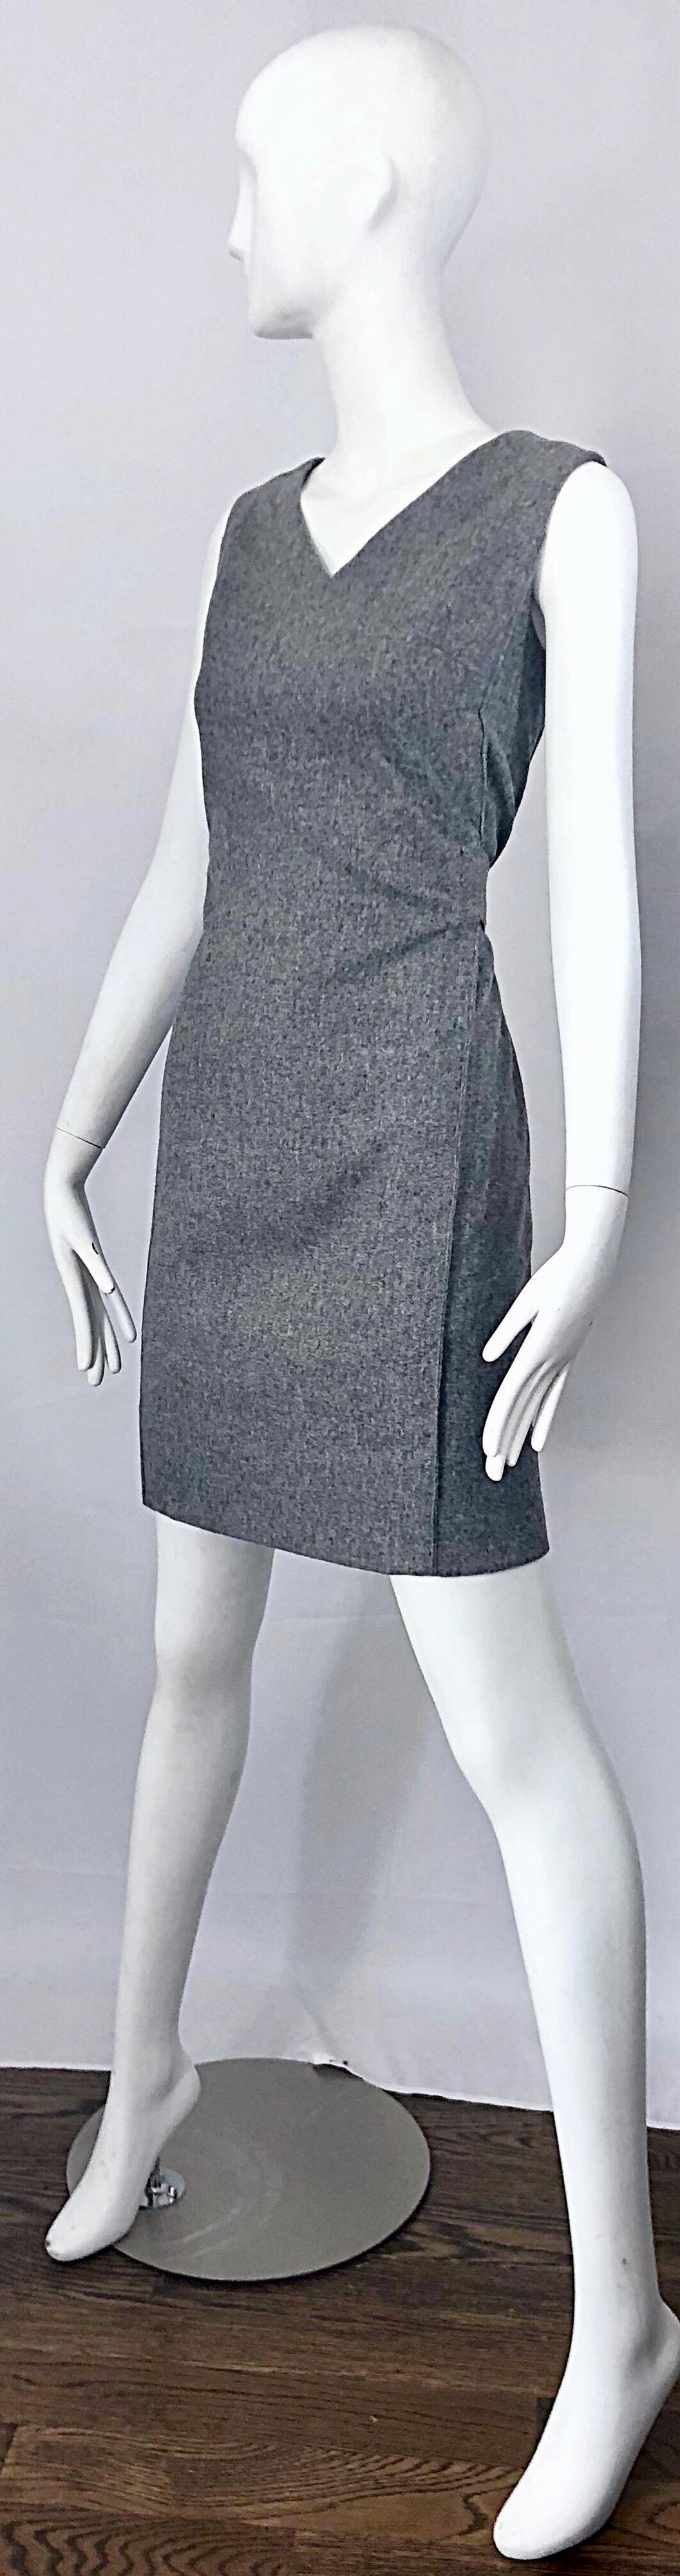 Chic 1960s Heather Gray Wool Sleeveless Vintage 60s Mod Shift Dress For Sale 3